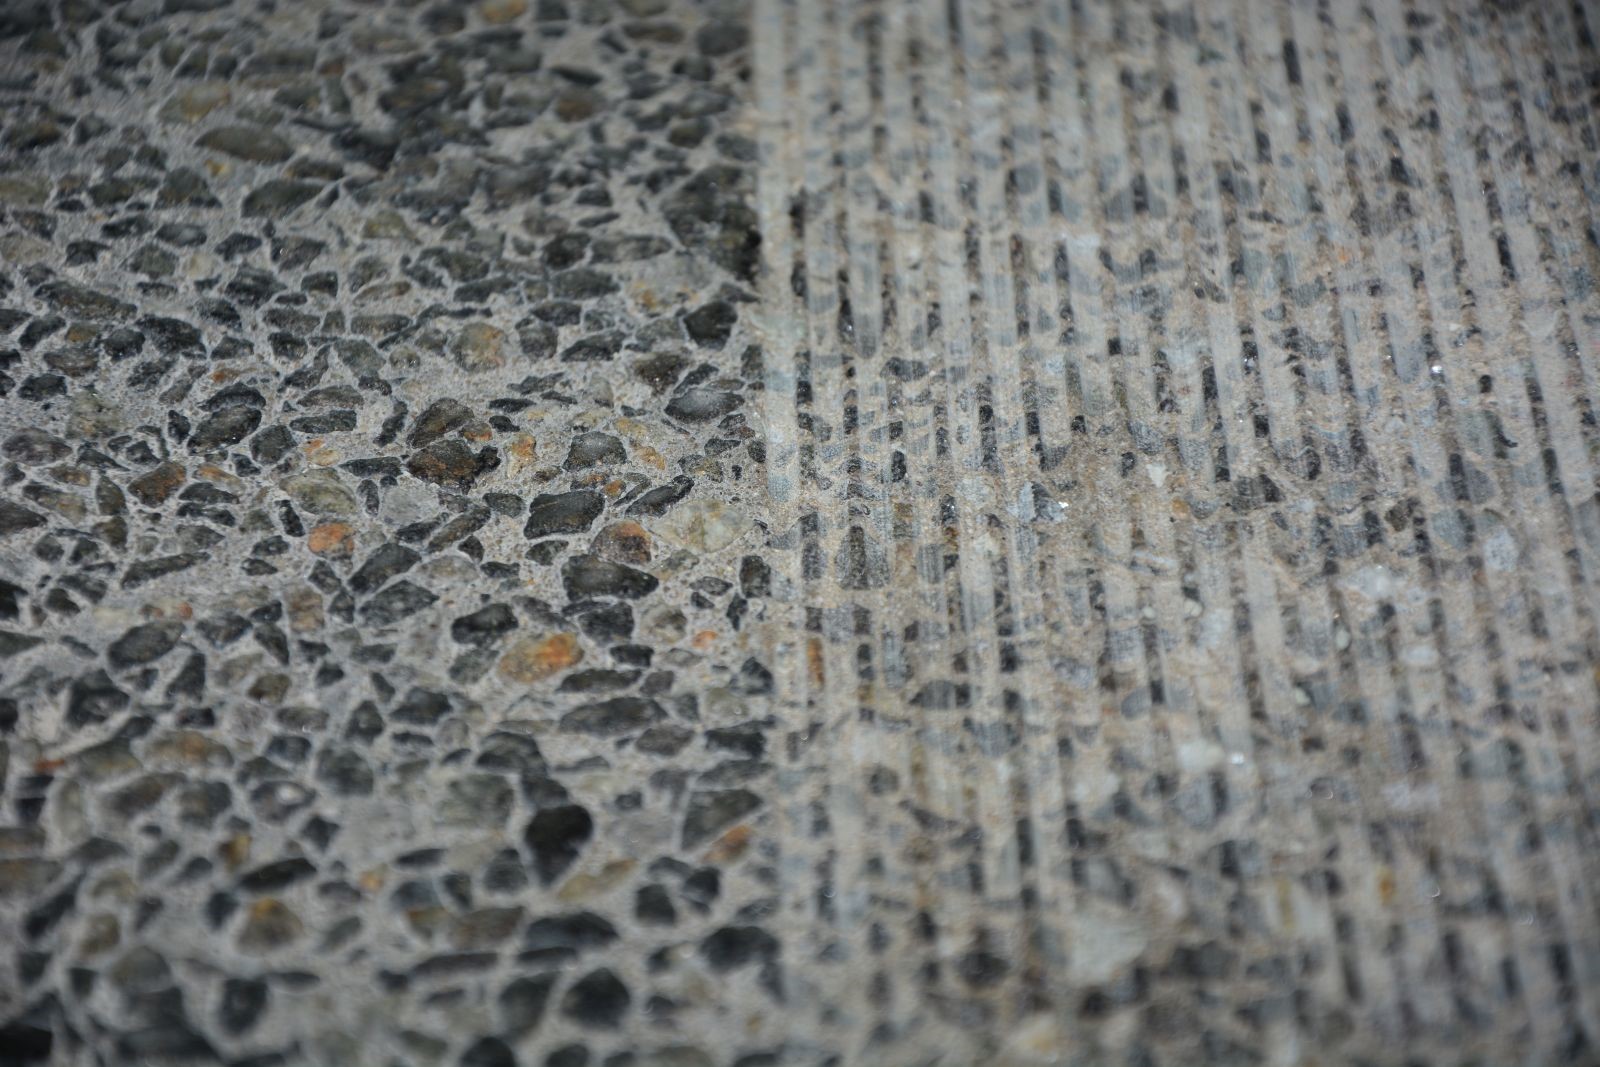 Grinding road surface